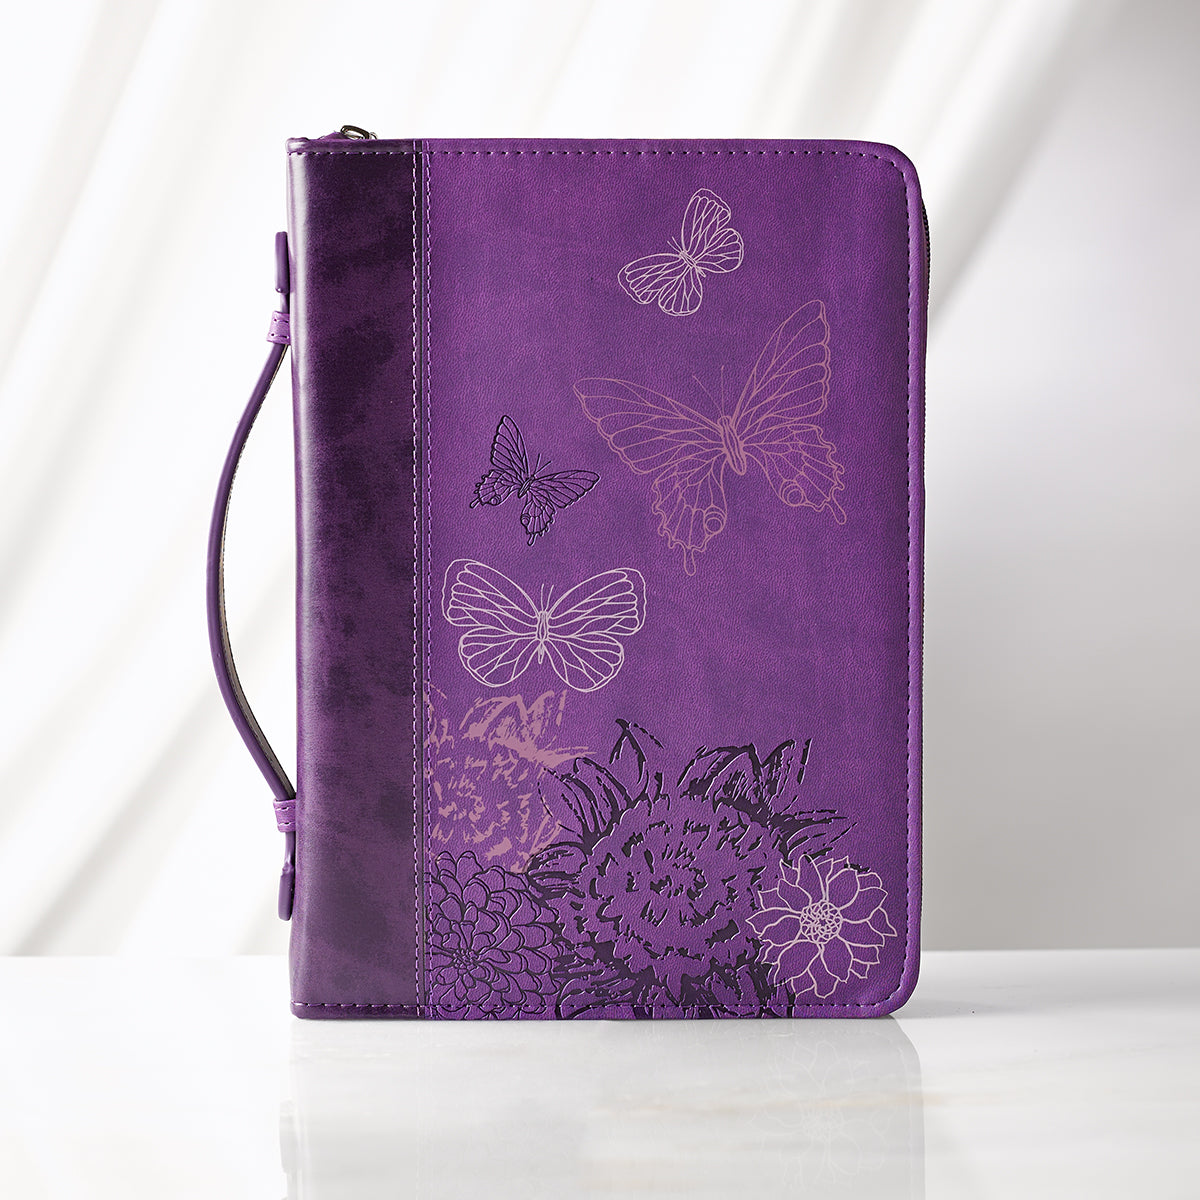 Image of Butterflies (Purple) LuxLeather Bible Cover, Medium other